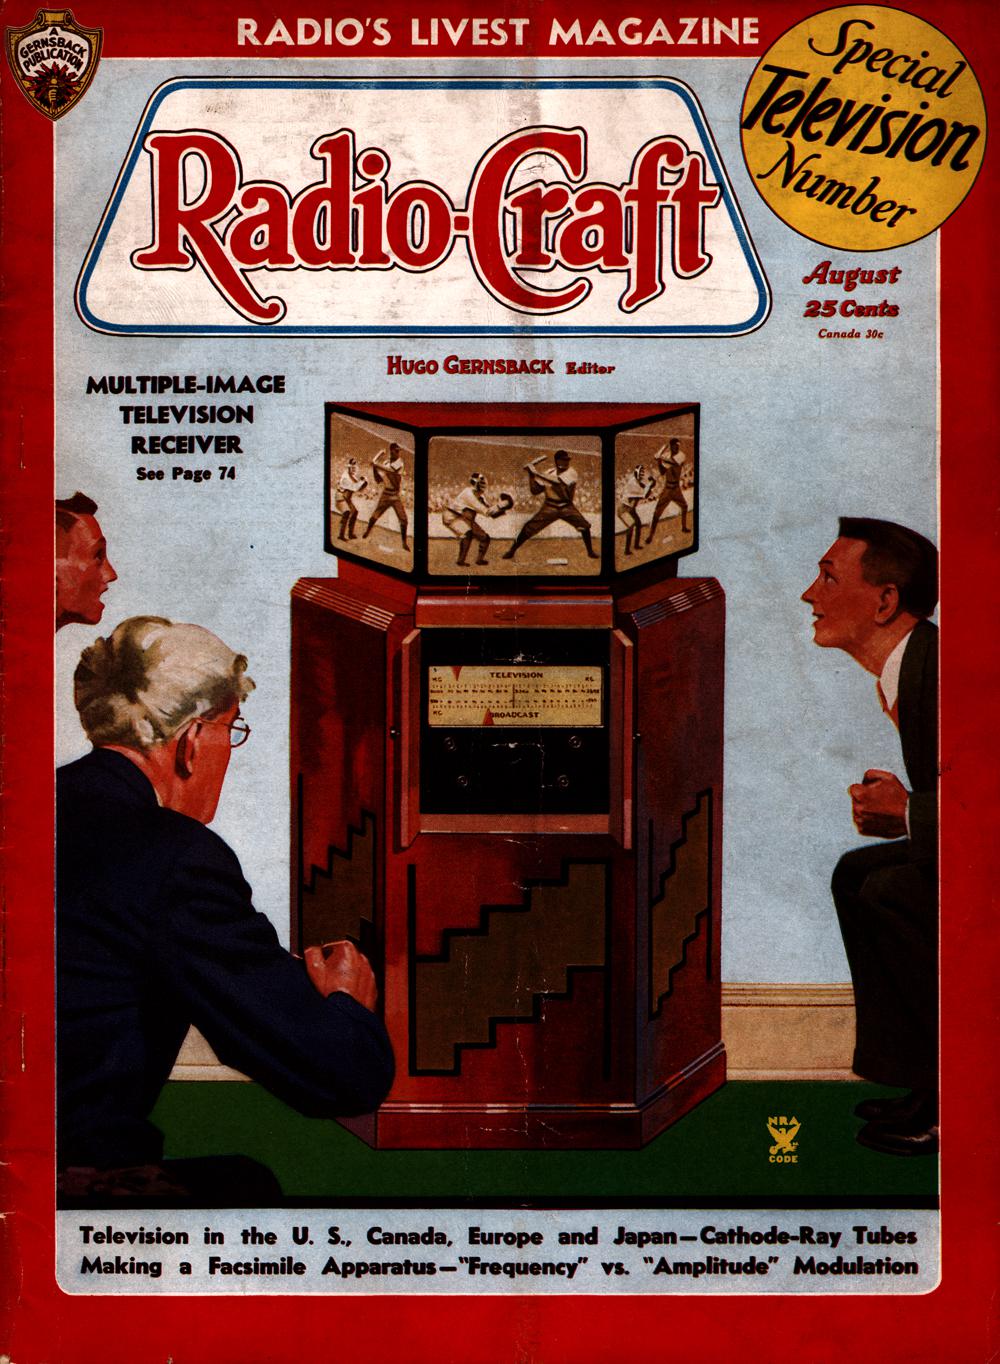 1935 - Radio-craft. and popular electronics; radio-electronics in all its phases - Vol. 7, No. 2